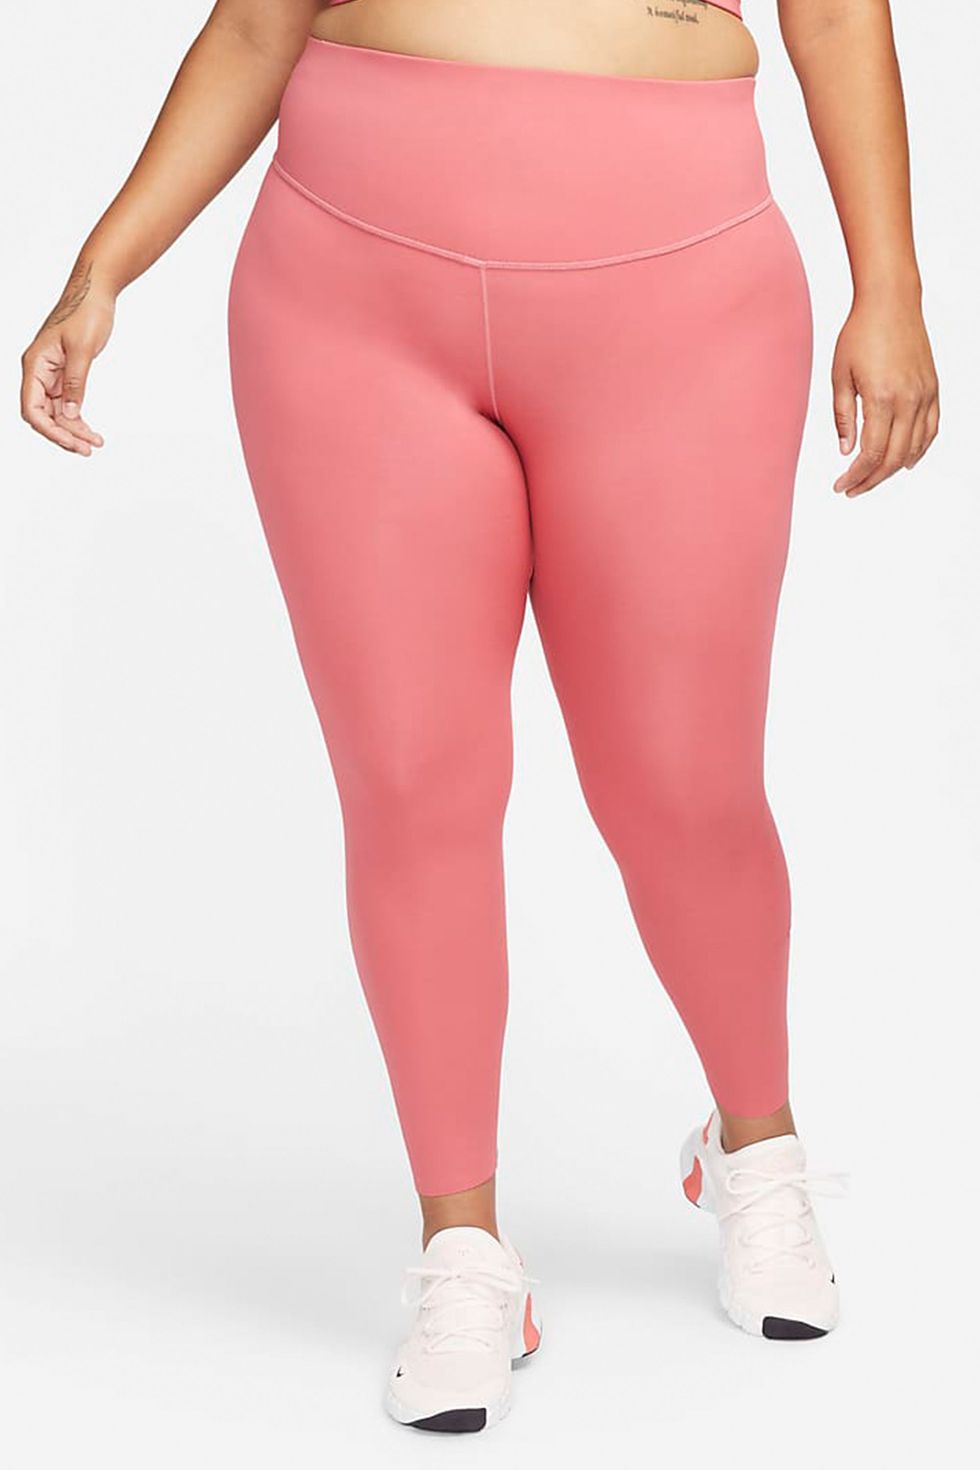 Sacred Collection- Plus Size Leggings